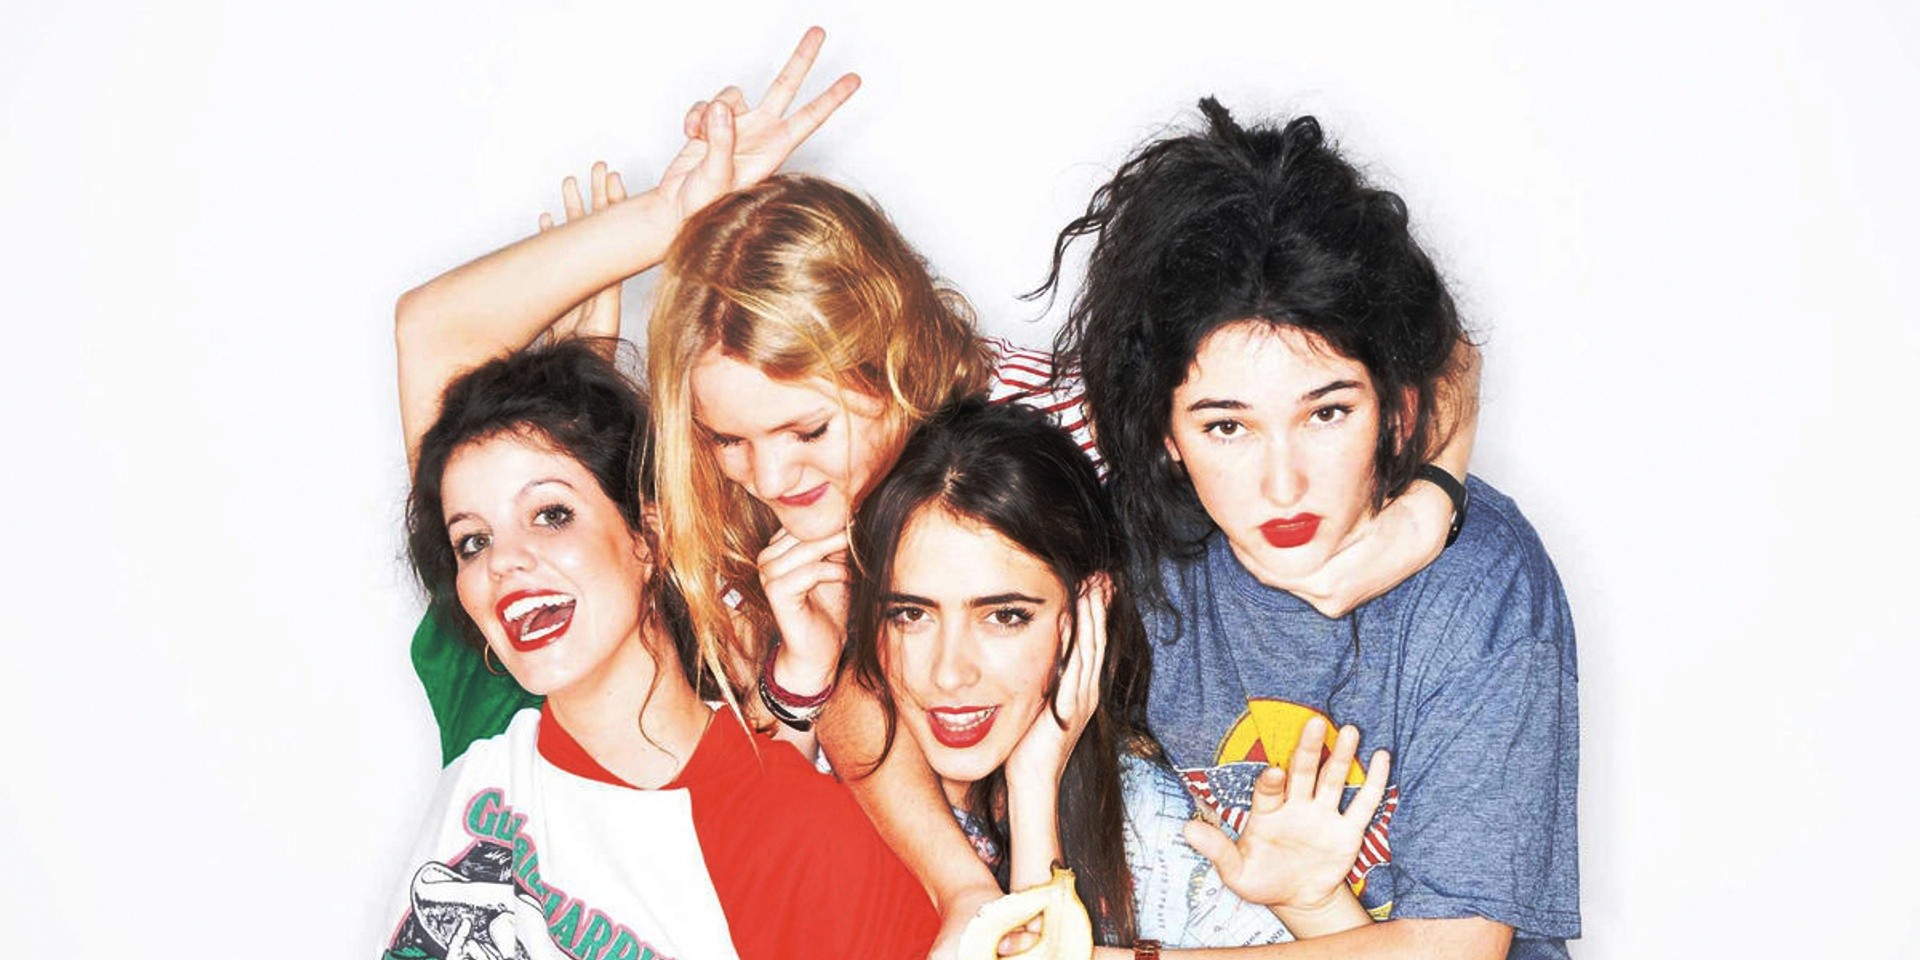 On the Record: The albums that shaped Hinds